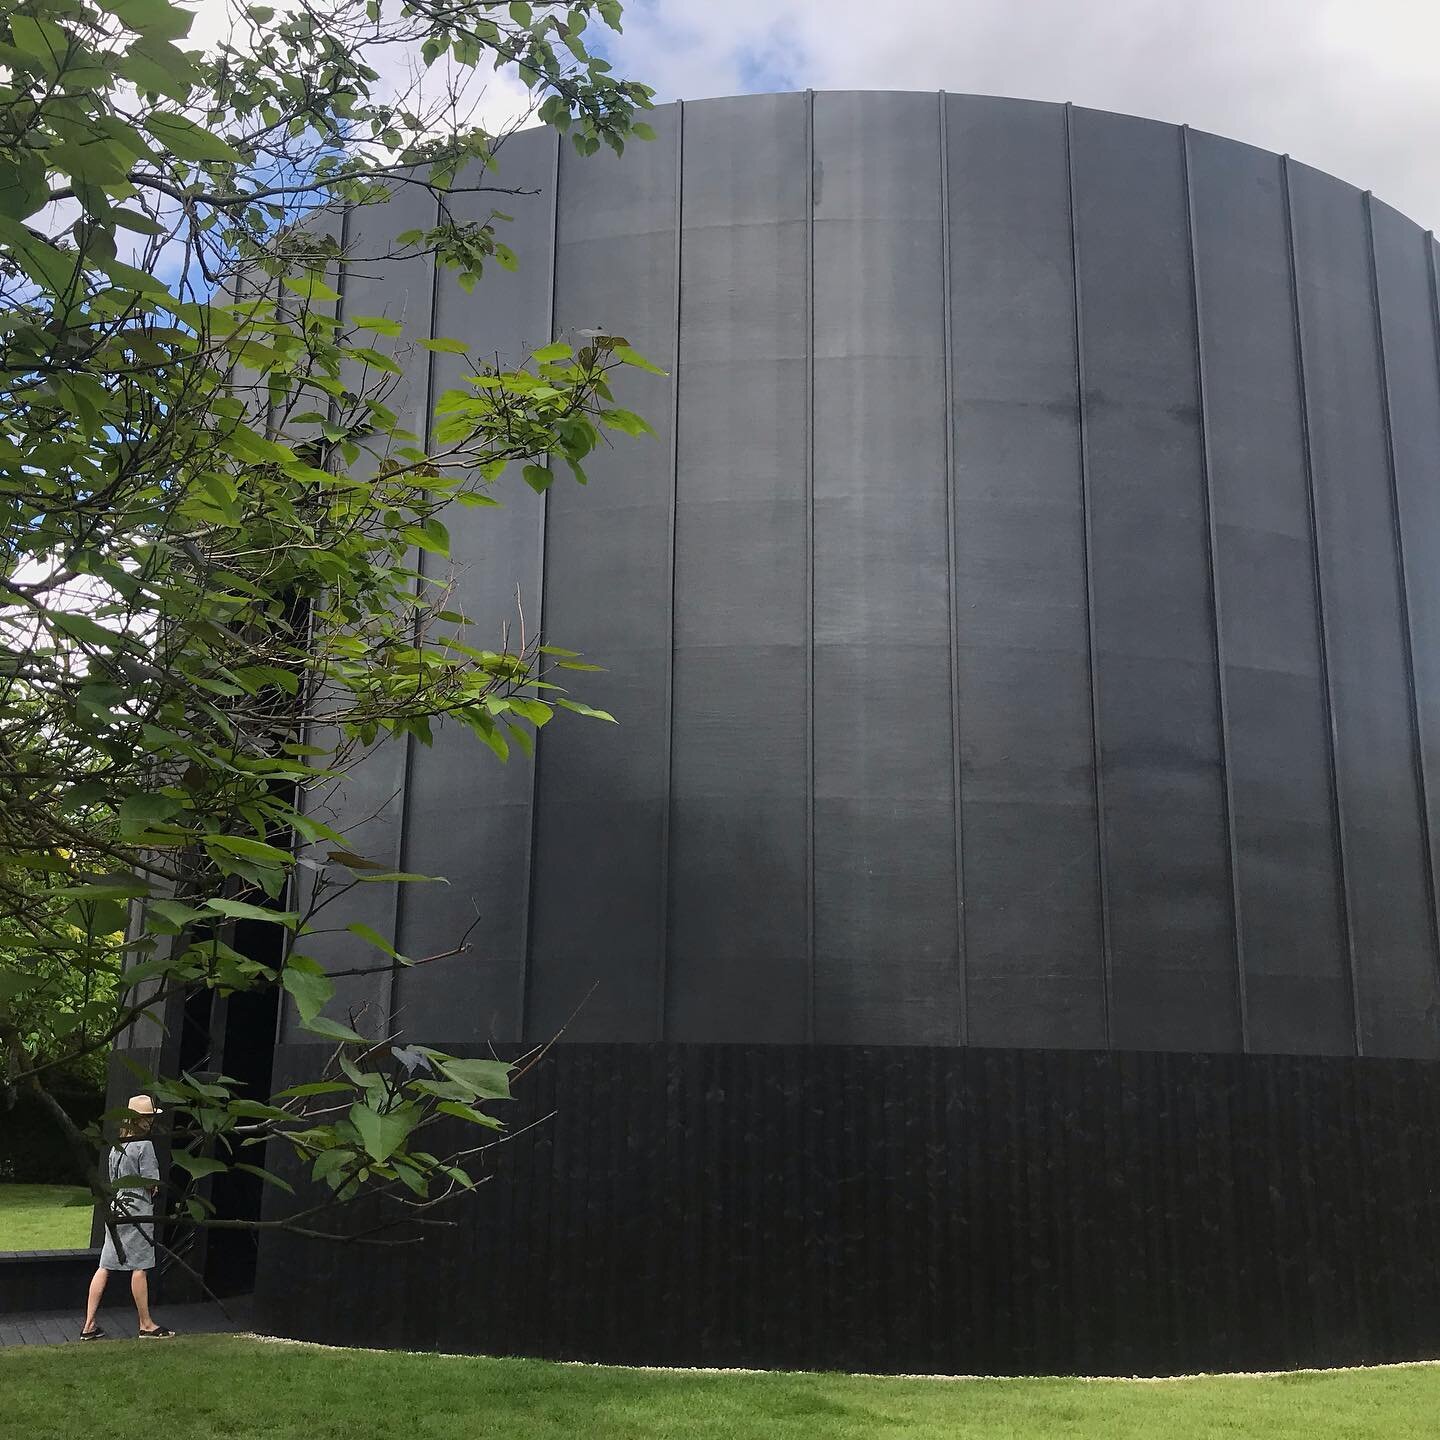 A fabulous conversation today between @theastergates and @adjaye_visual_sketchbook moderated by @hansulrichobrist in the Serpentine Pavilion. &lsquo;Black Chapel&rsquo; is an open, inclusive and honest space. Artist and architect shared poignant obse